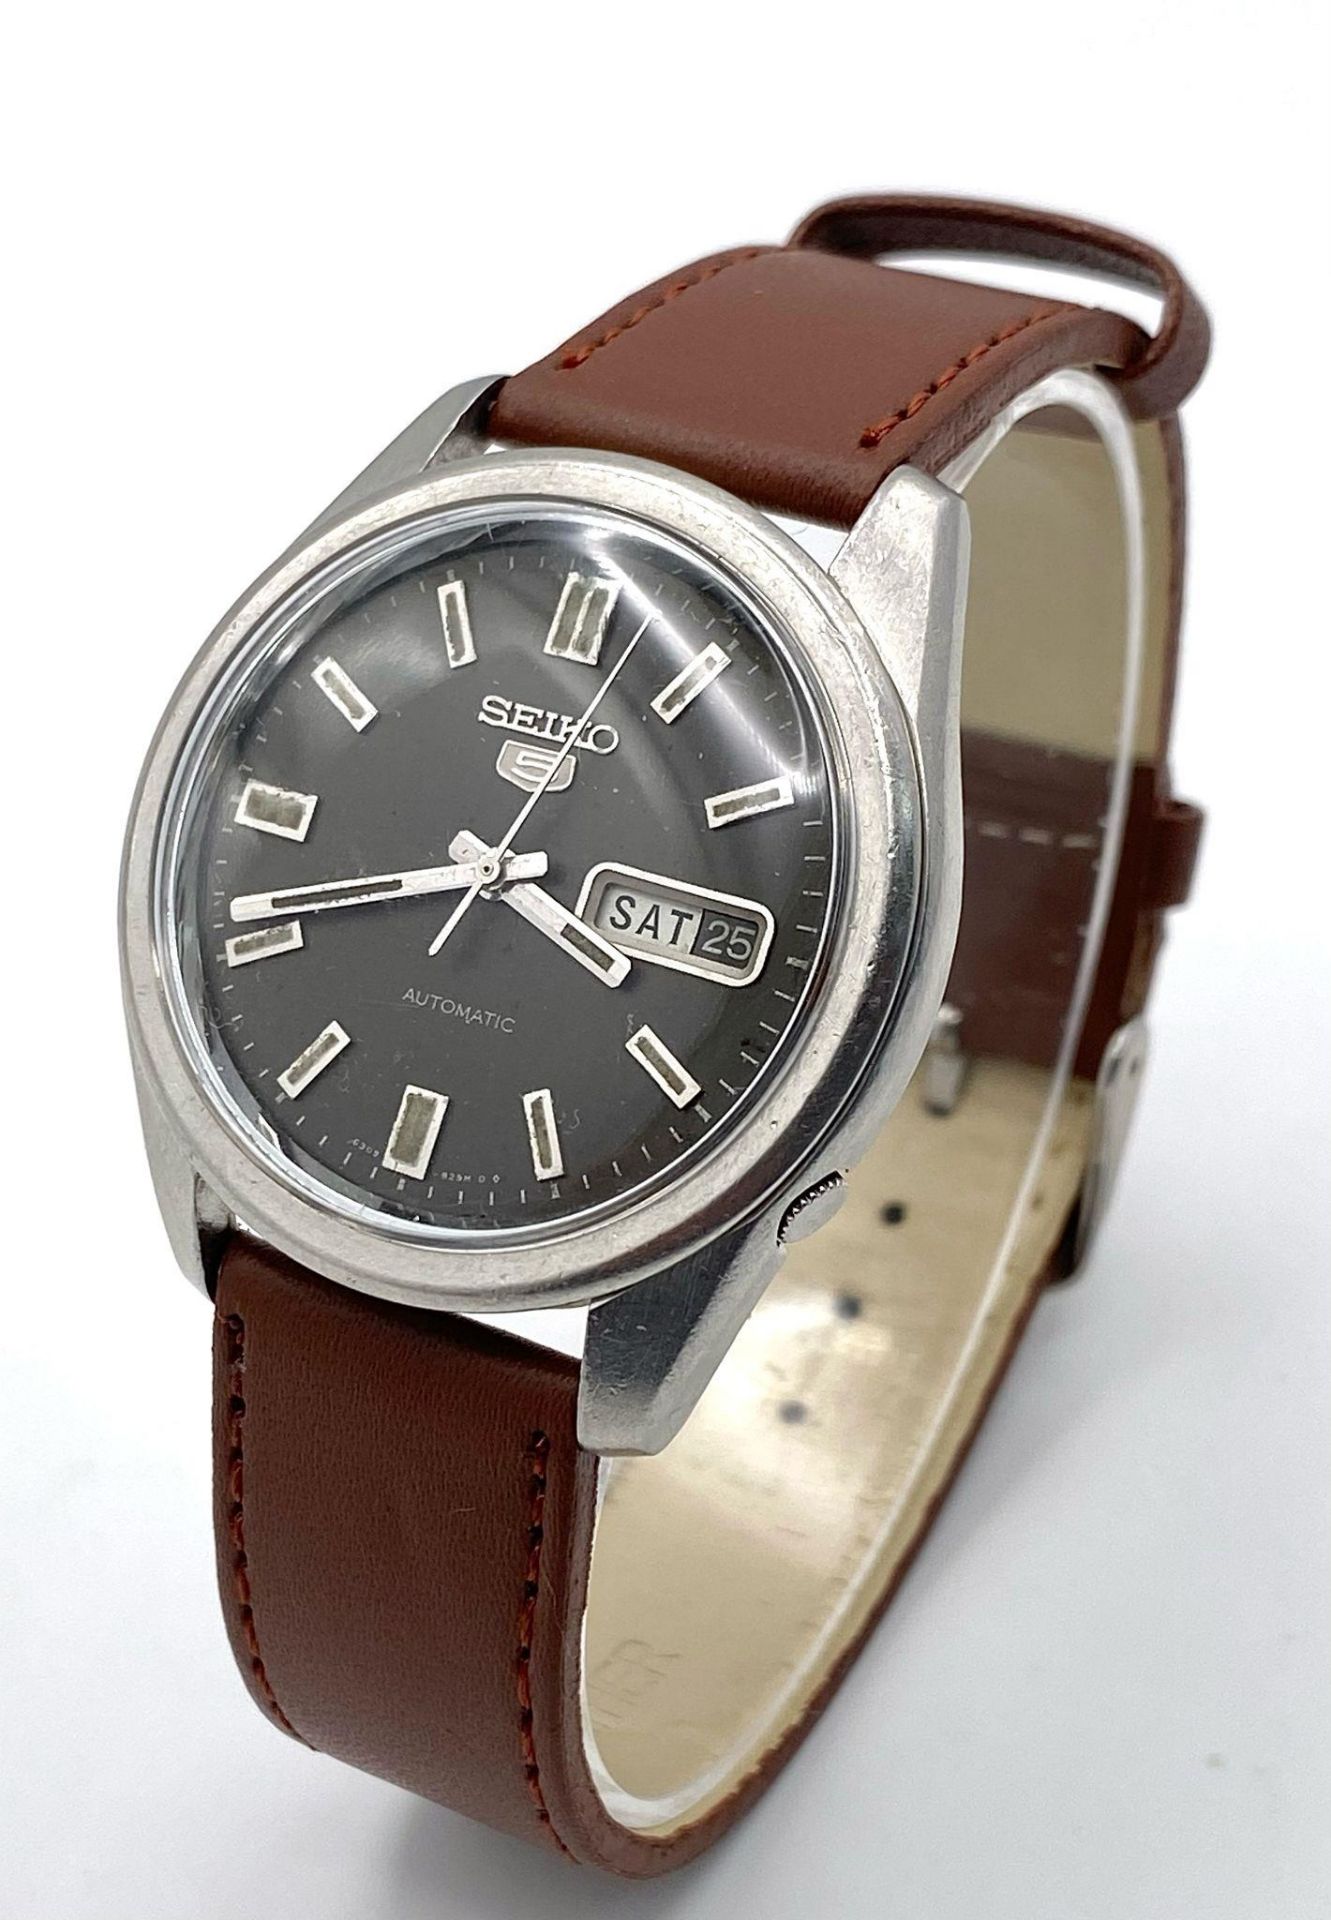 A Vintage Seiko 5 Automatic Gents Watch. Brown leather strap. Stainless steel case - 37mm. Dark grey